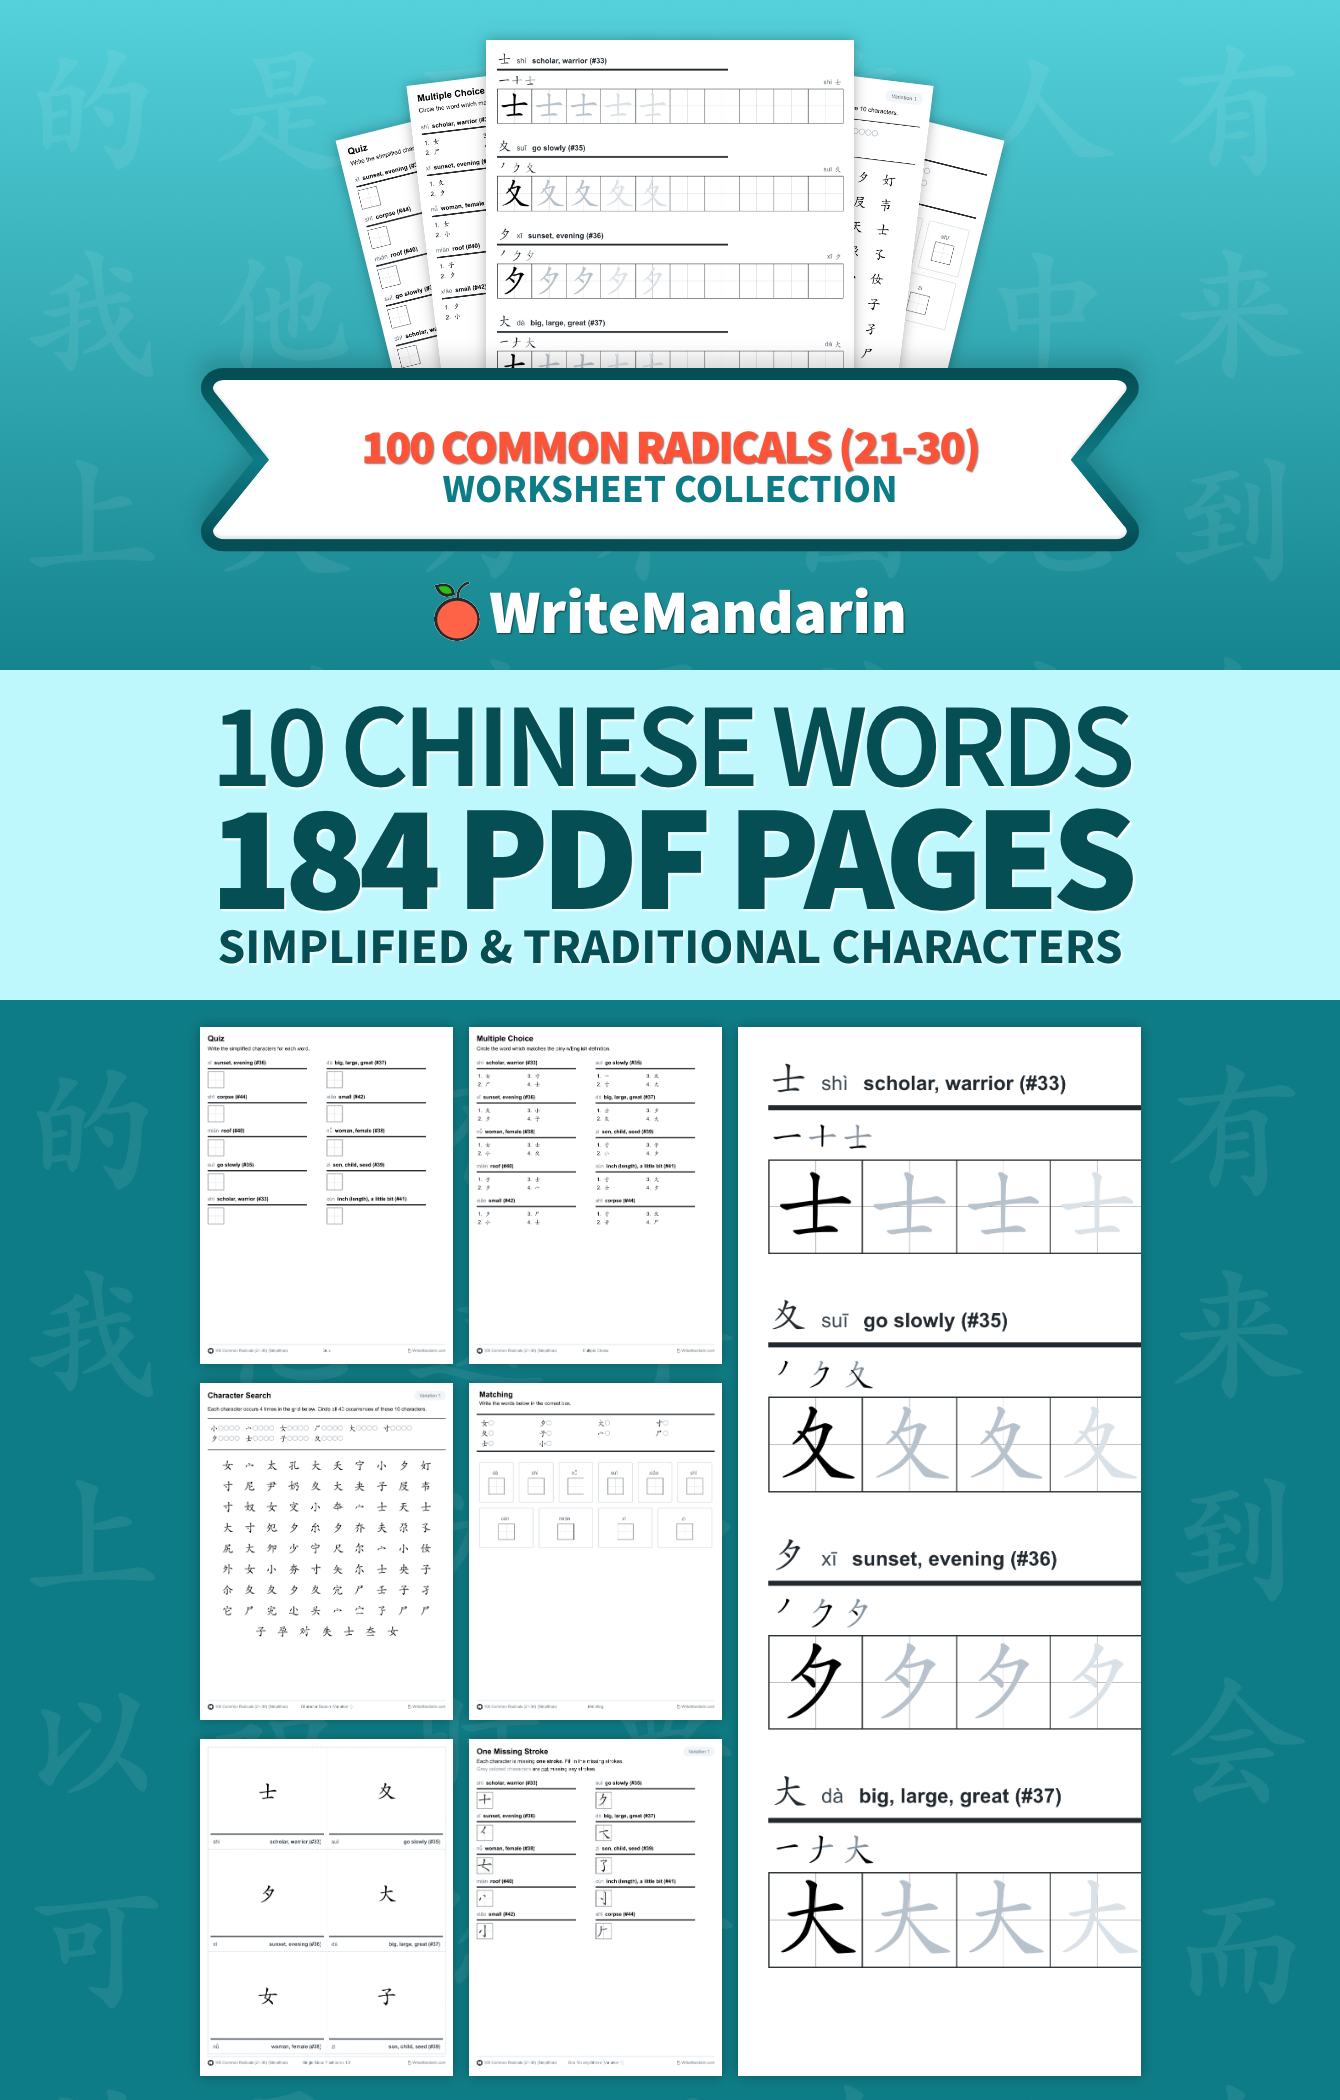 Preview image of 100 Common Radicals (21-30) worksheet collection